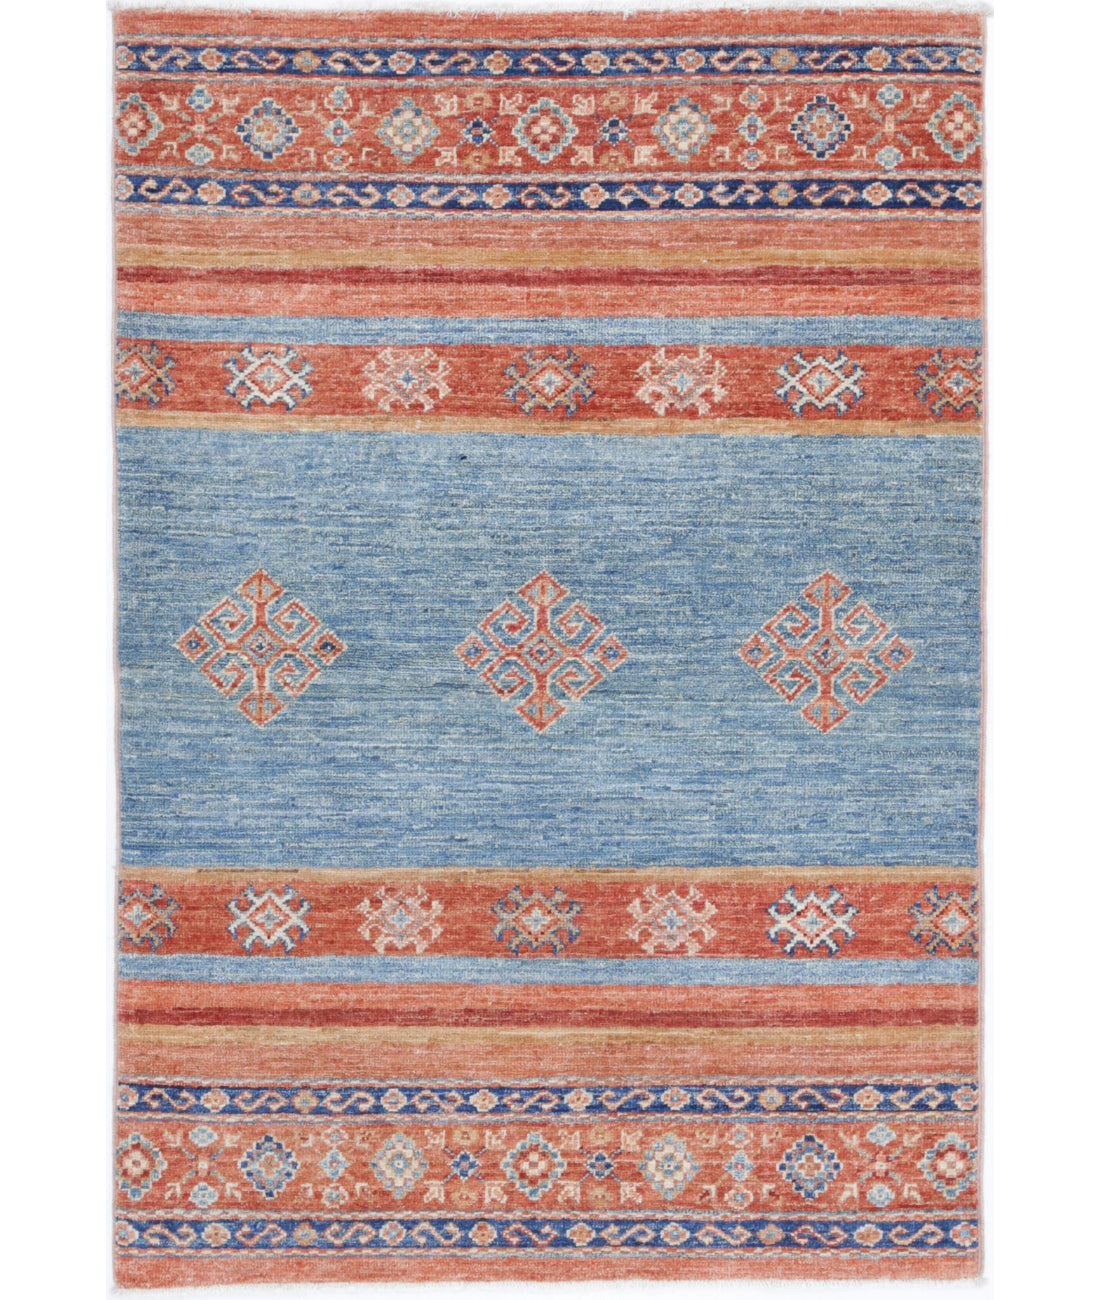 Hand Knotted Khurjeen Wool Rug - 2'7'' x 3'11'' 2'7'' x 3'11'' (78 X 118) / Multi / Multi